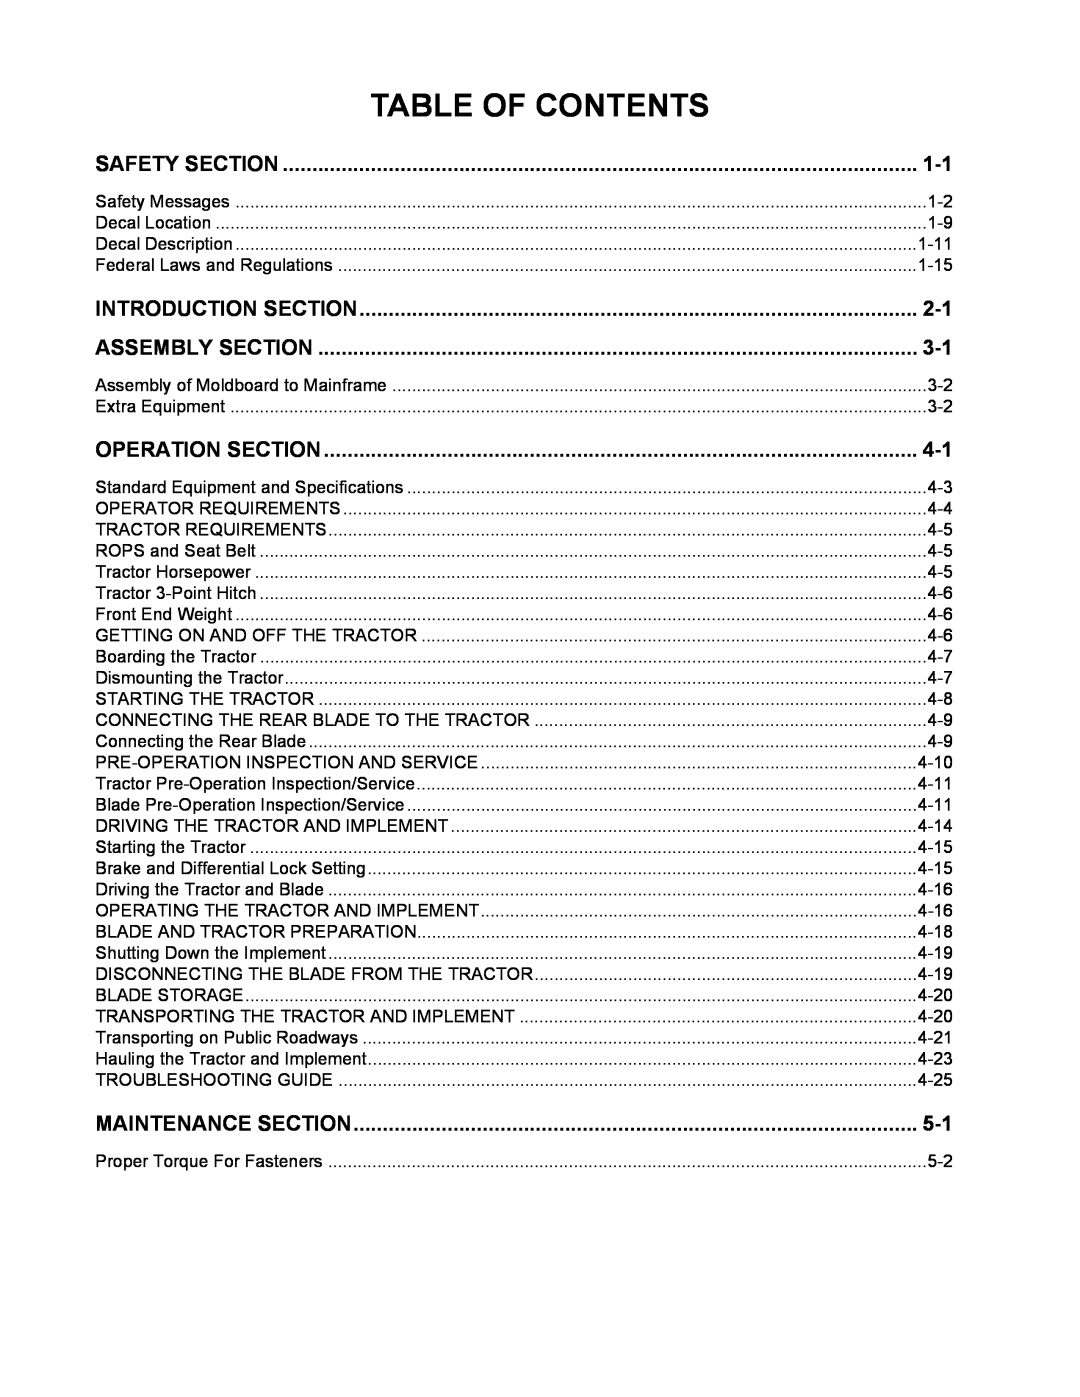 Alamo 800 manual Table Of Contents, Introduction Section, Assembly Section, Operation Section, Maintenance Section 